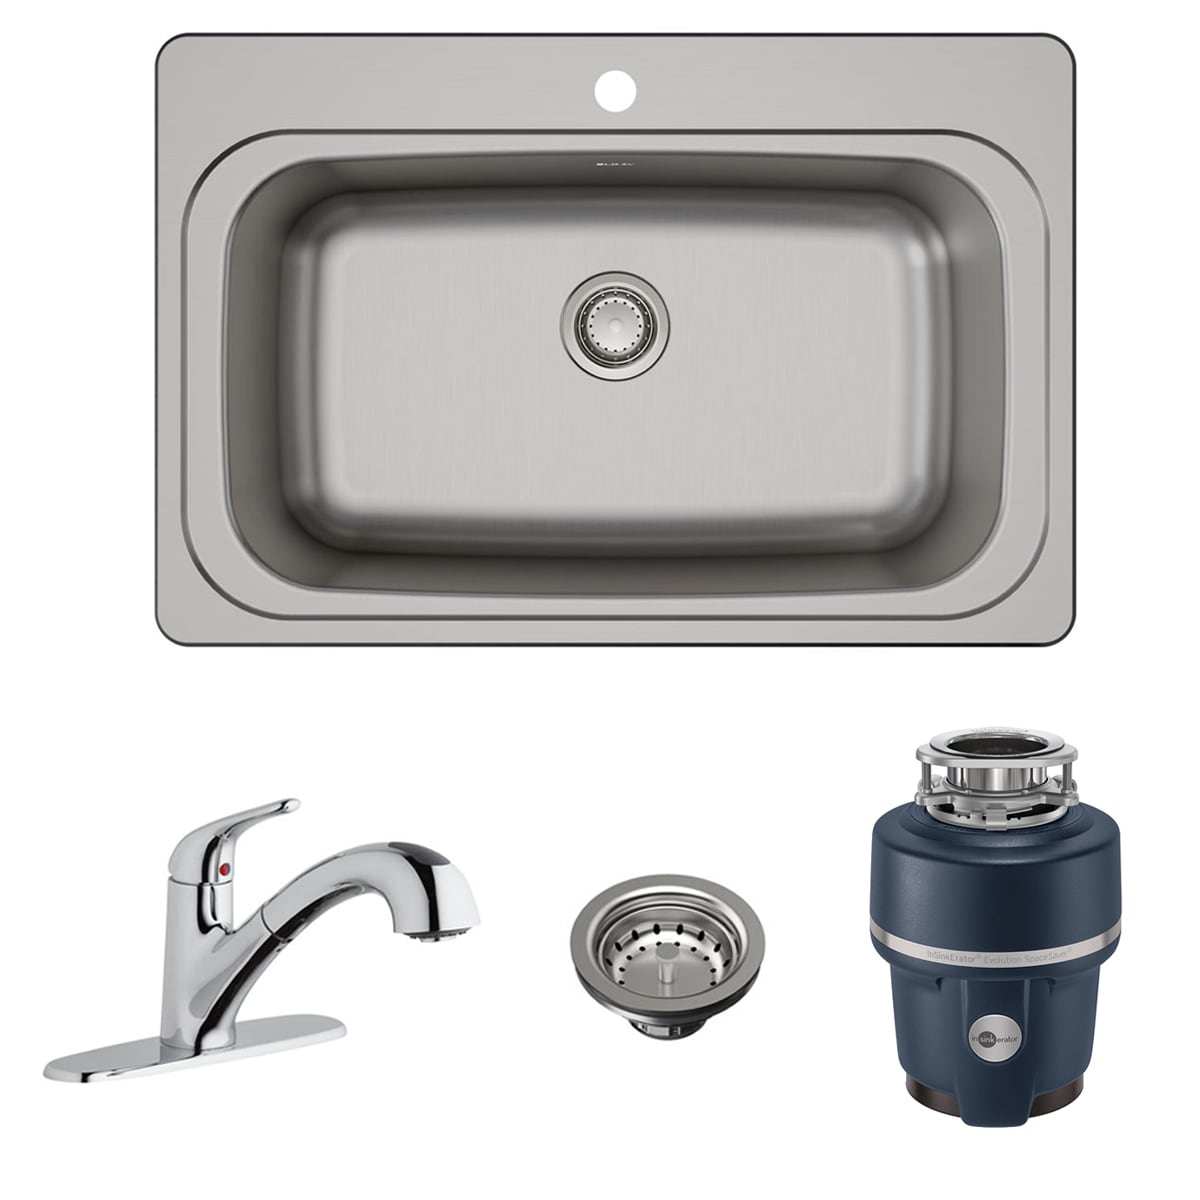 Essential Values Garbage Disposal Splash Guard, Includes Sink Baffle and Bonus Sink Stopper | Compatible with Disposals & Universal Sinks